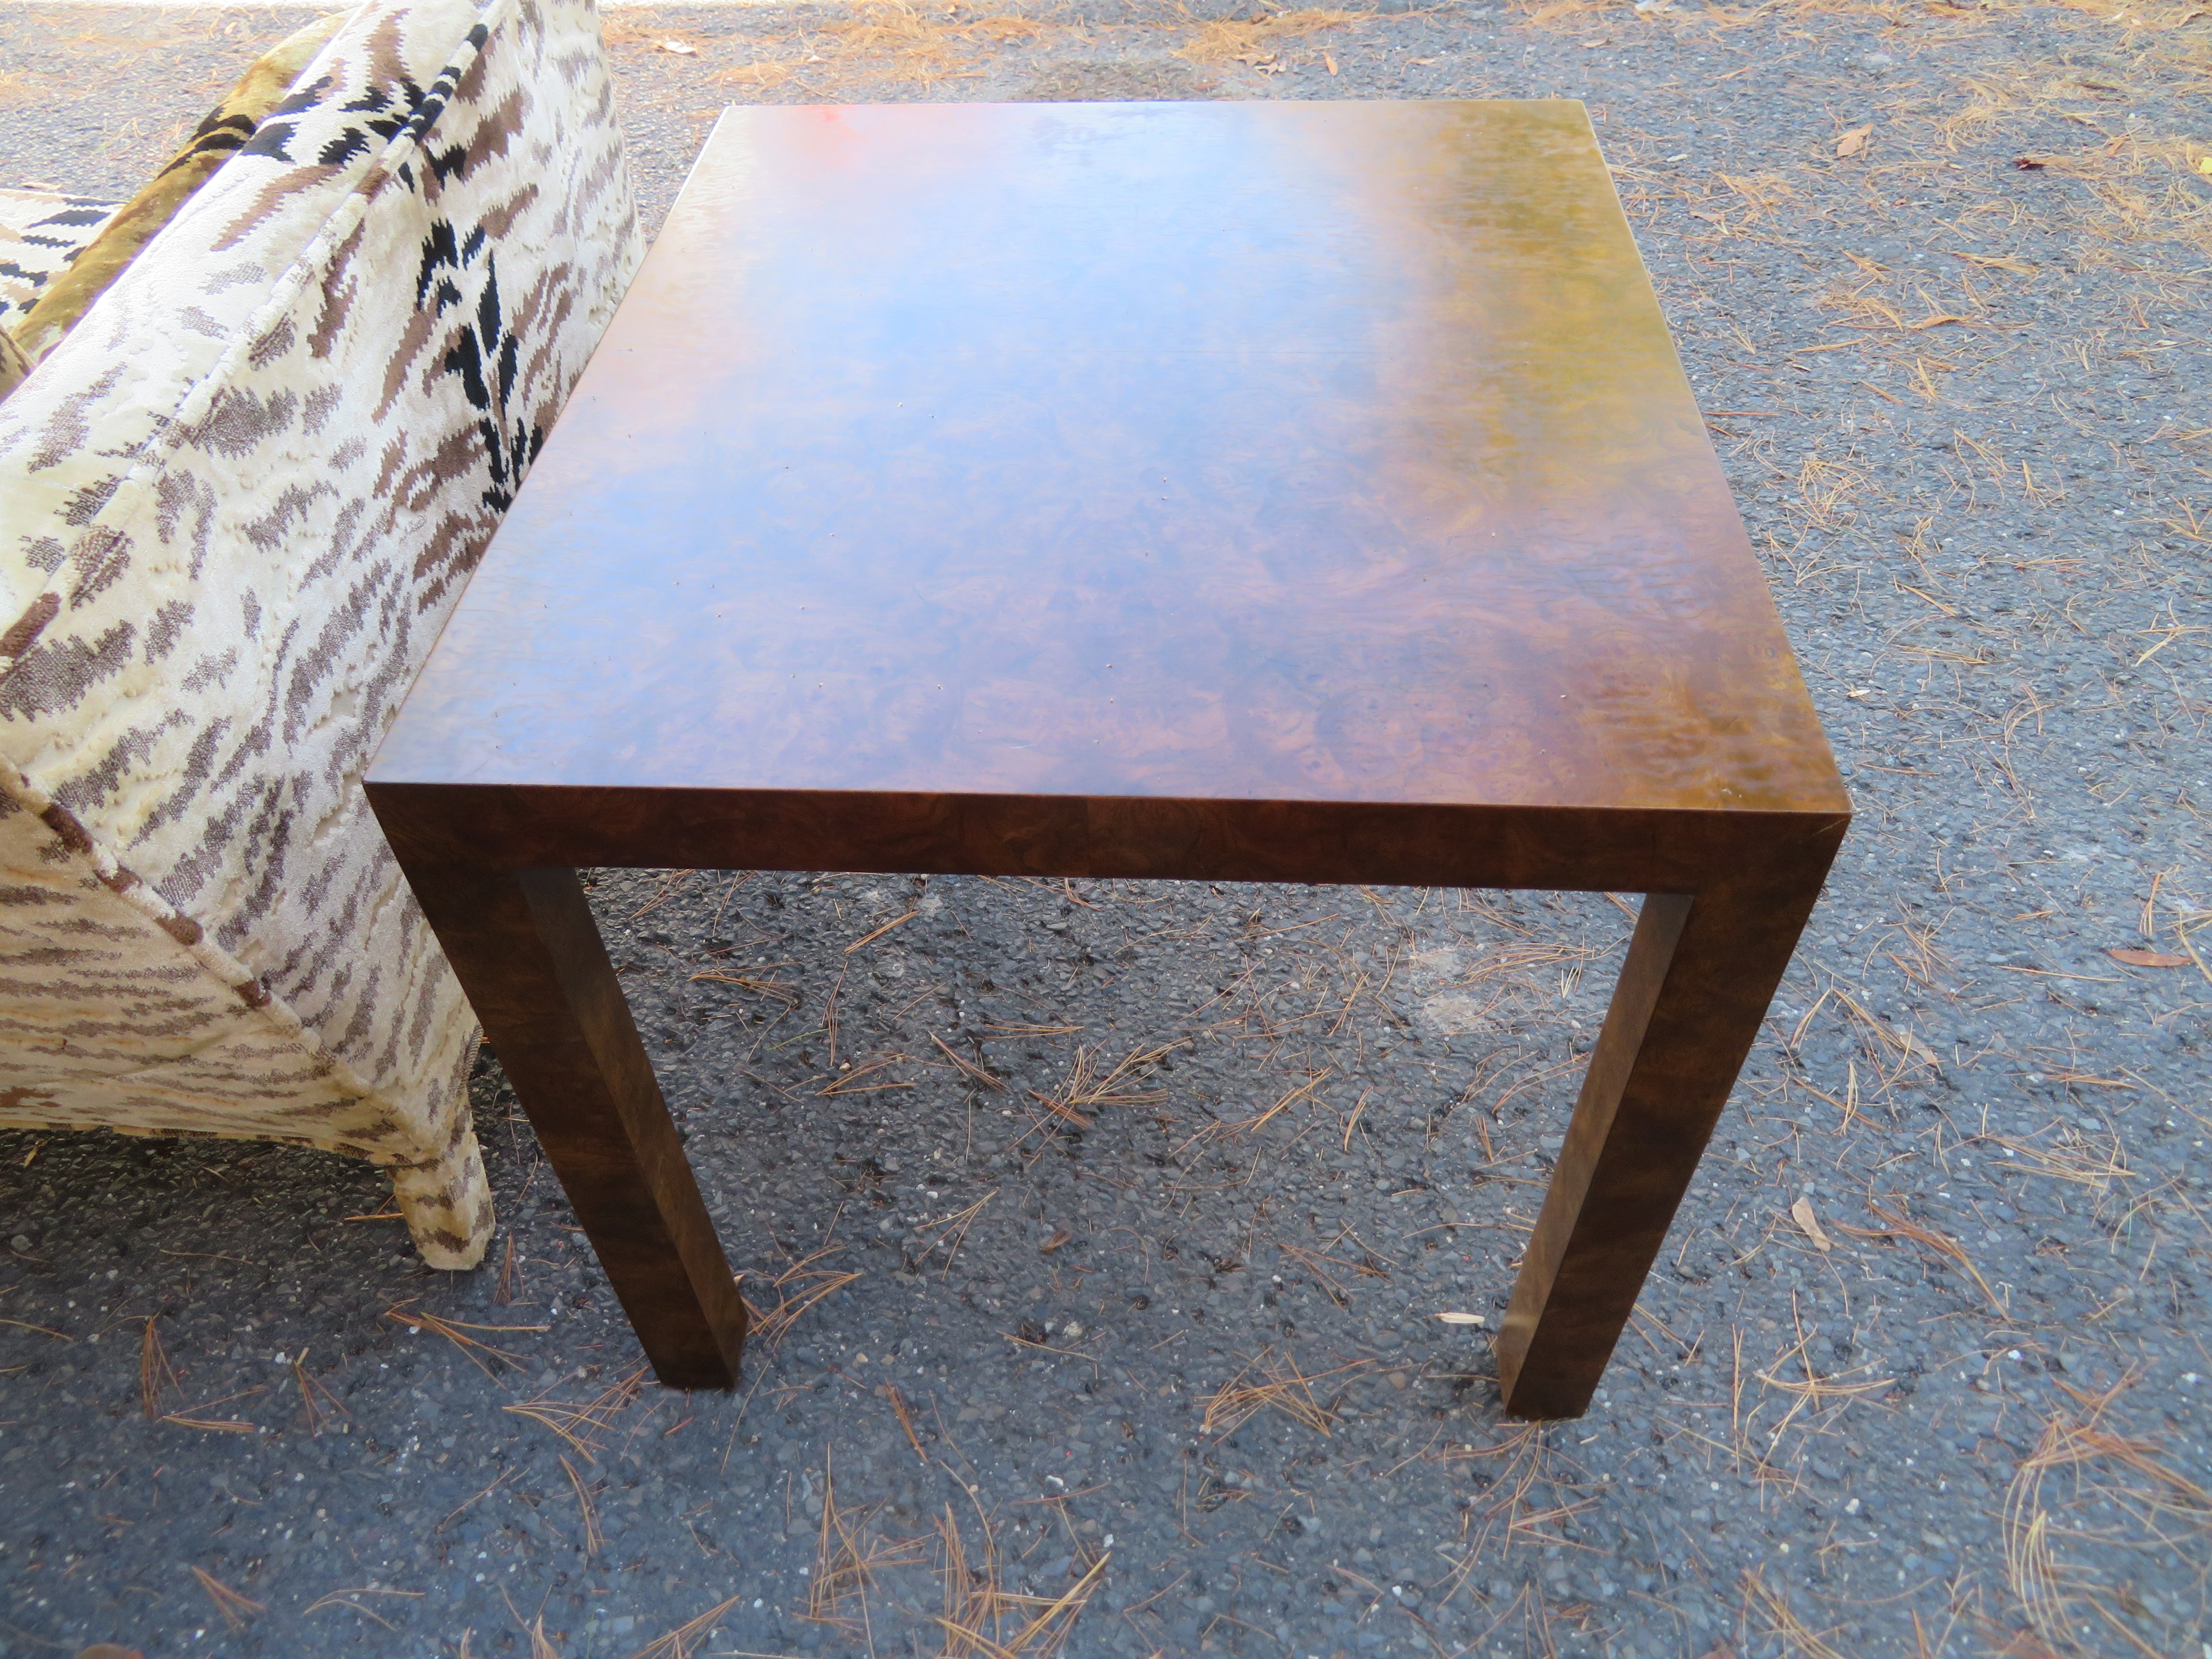 Mid-century modernist burl wood Parsons side/end table in the style of Milo Baughman. The table features a squared-off look with a beautiful deep walnut burl wood veneer. We love using these tables next to our vintage sofas-see photos. This table